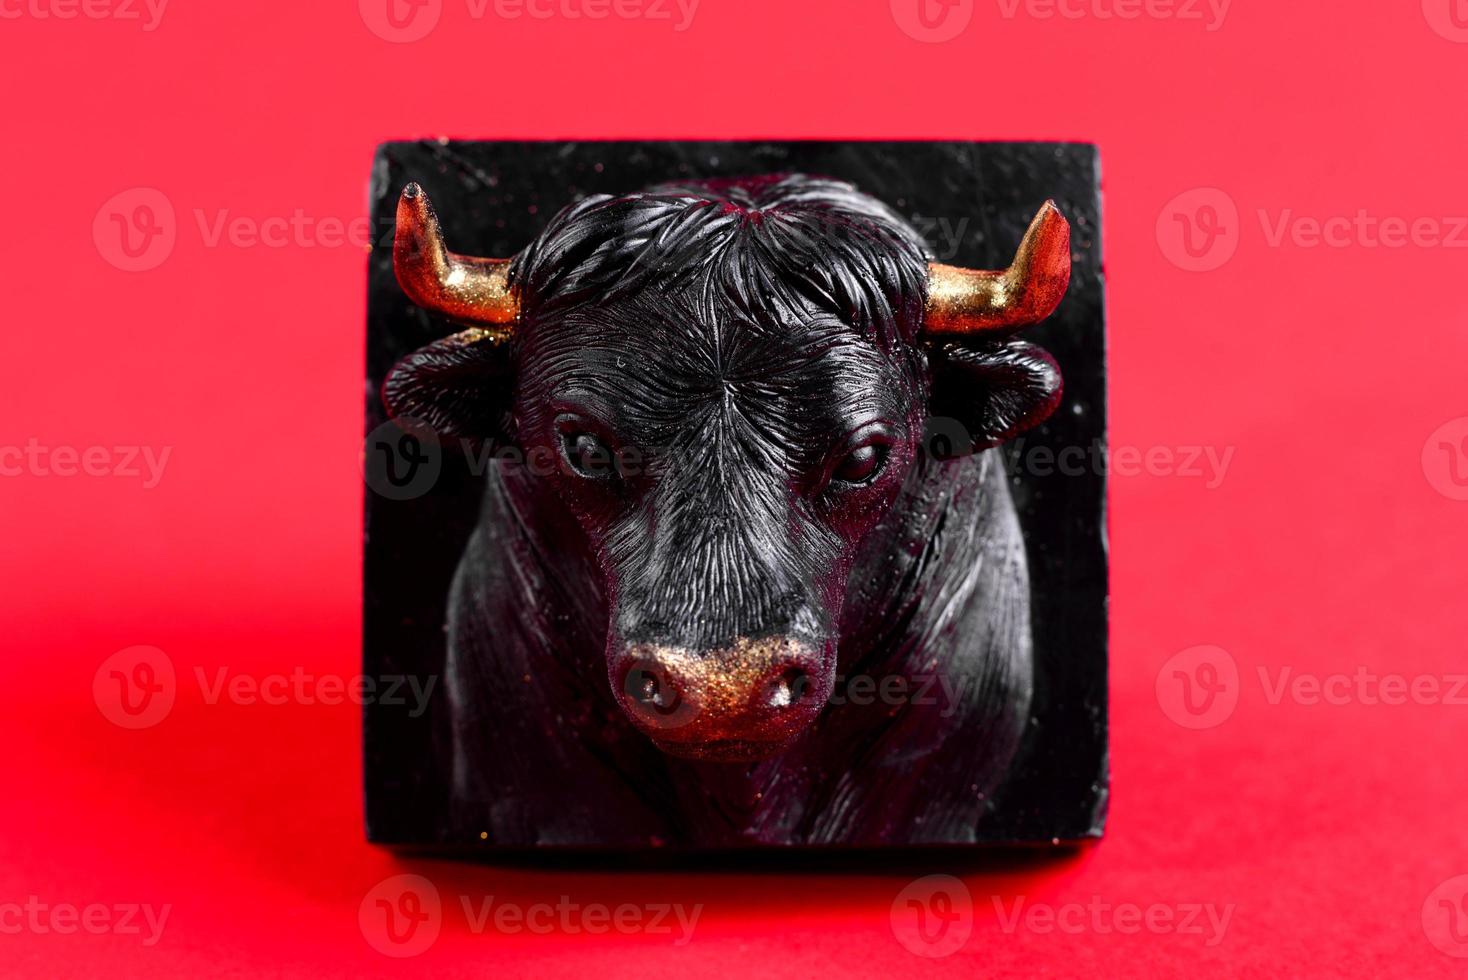 The figure of a bull made of soap as a gift photo